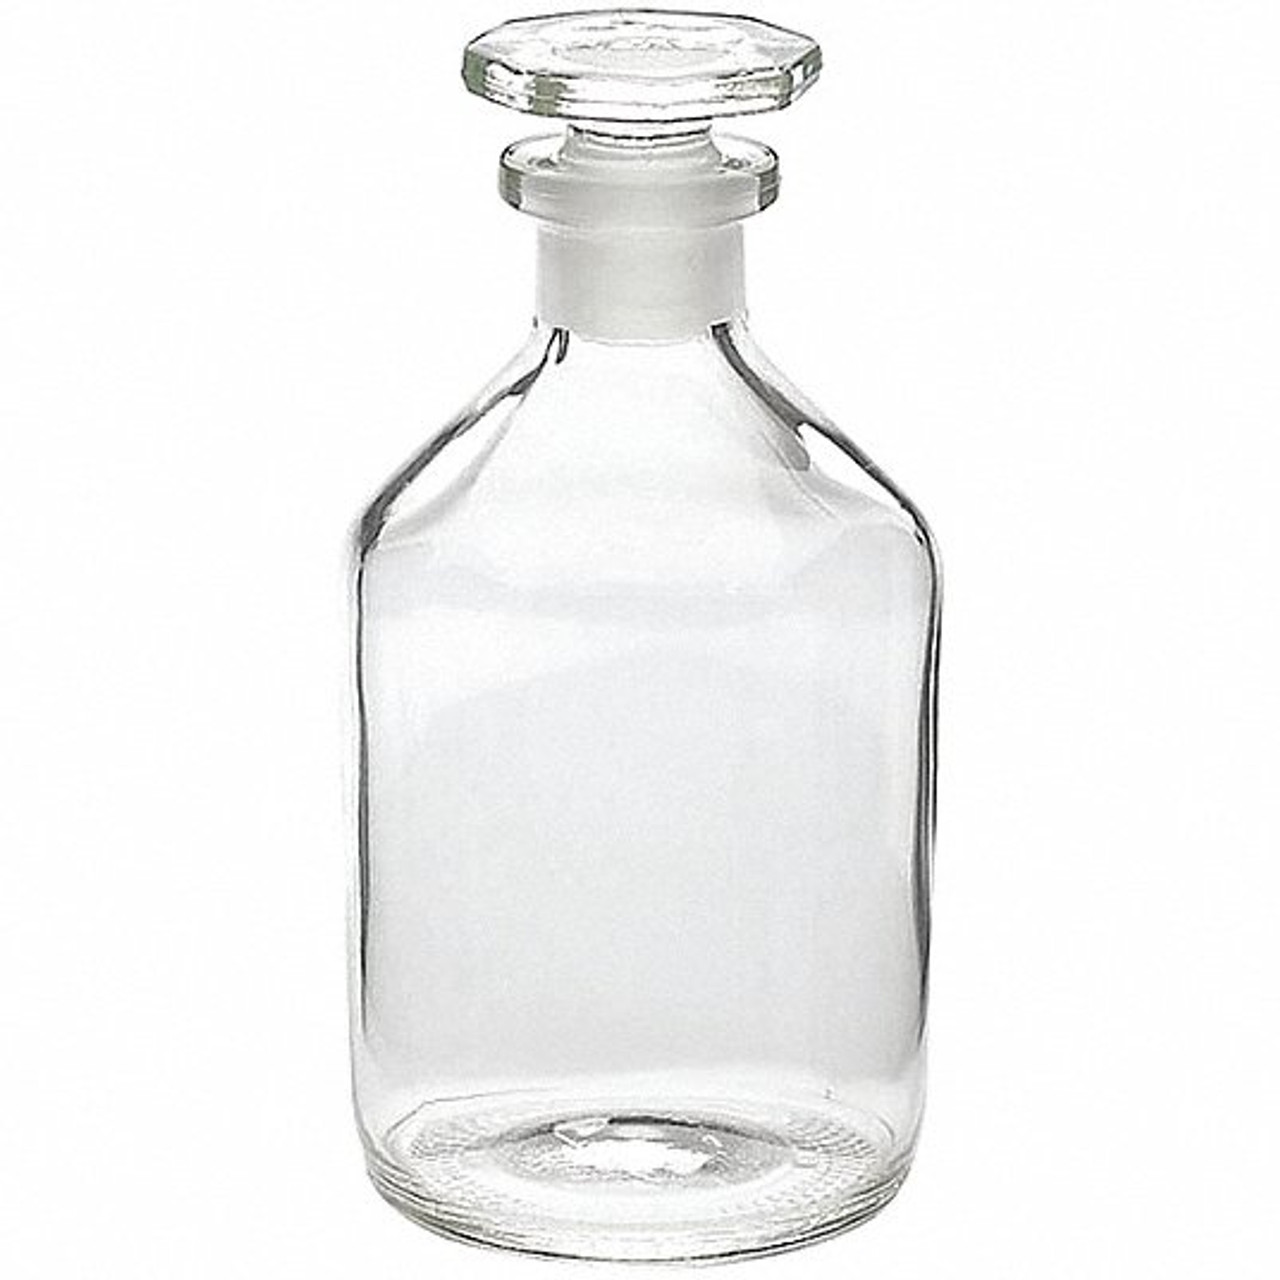 Wheaton 215240 Narrow Mouth Reagent Bottle, Clear Glass, 1000mL - B5561-4 -  General Laboratory Supply